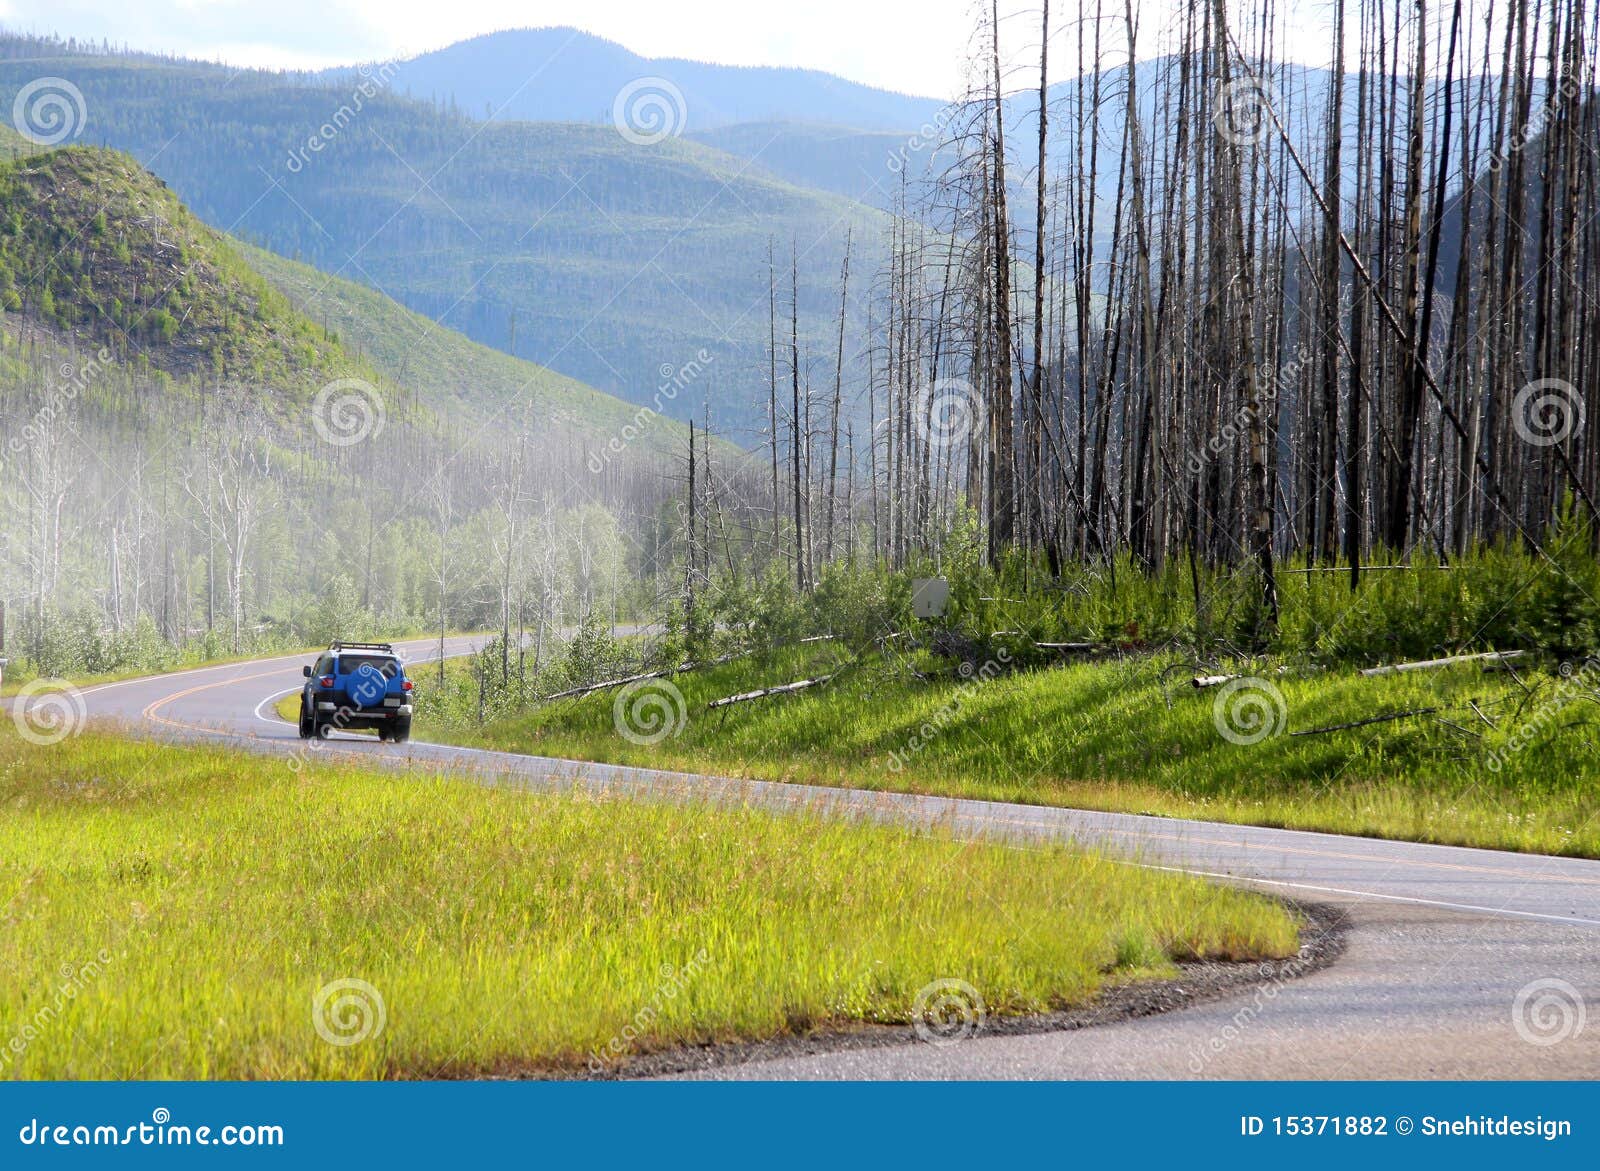 Scenic drive through rocky mountains in Montana.